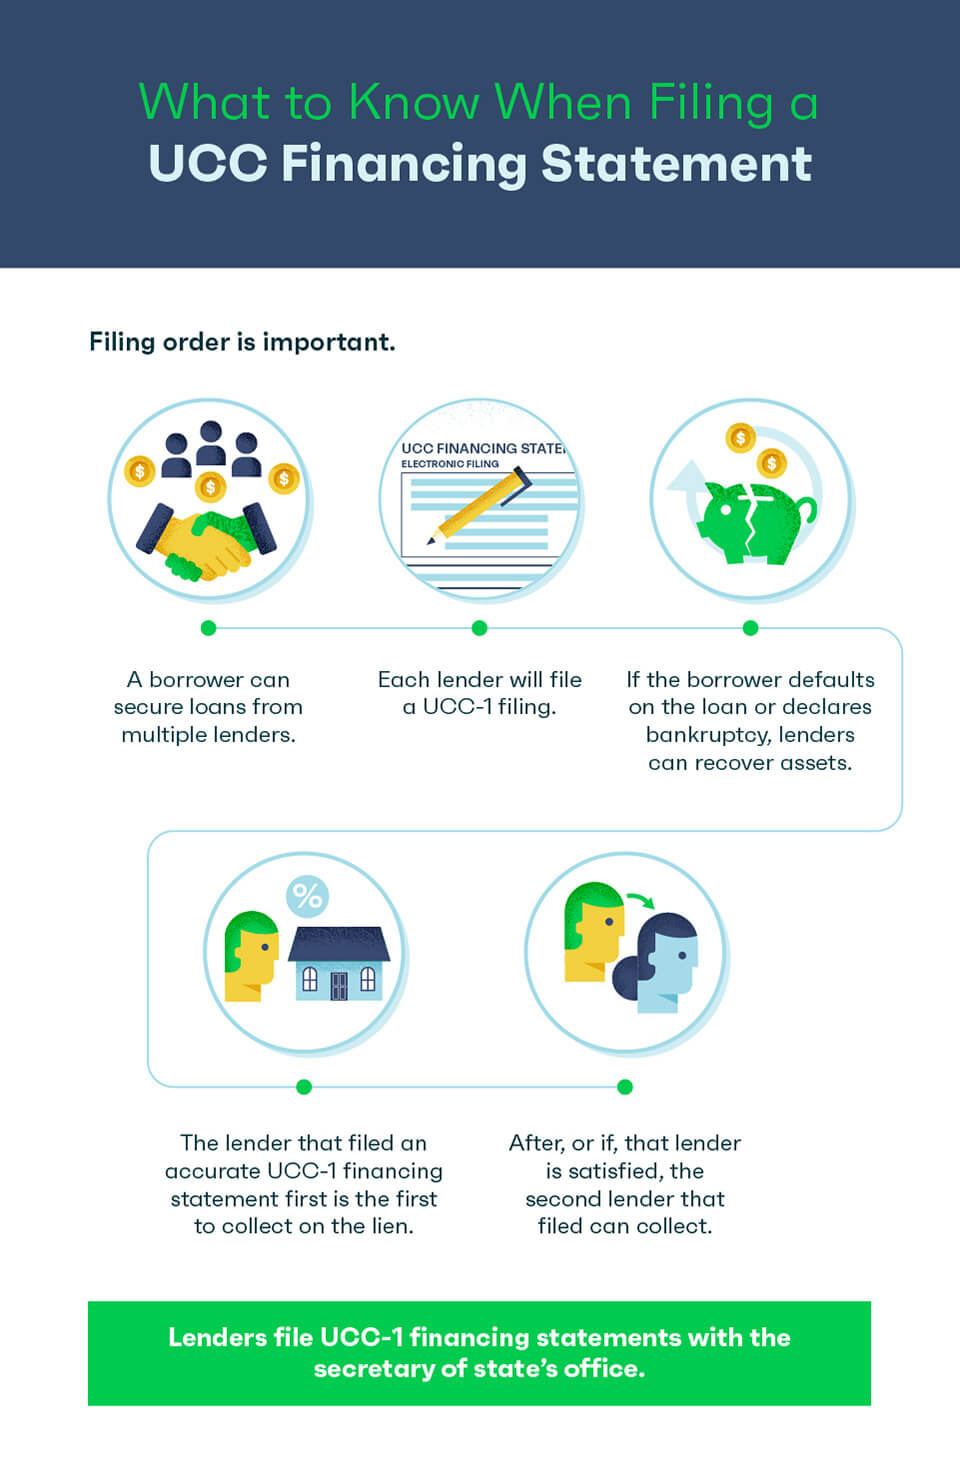 Infographic: What to know when filing a UCC Financing Statement